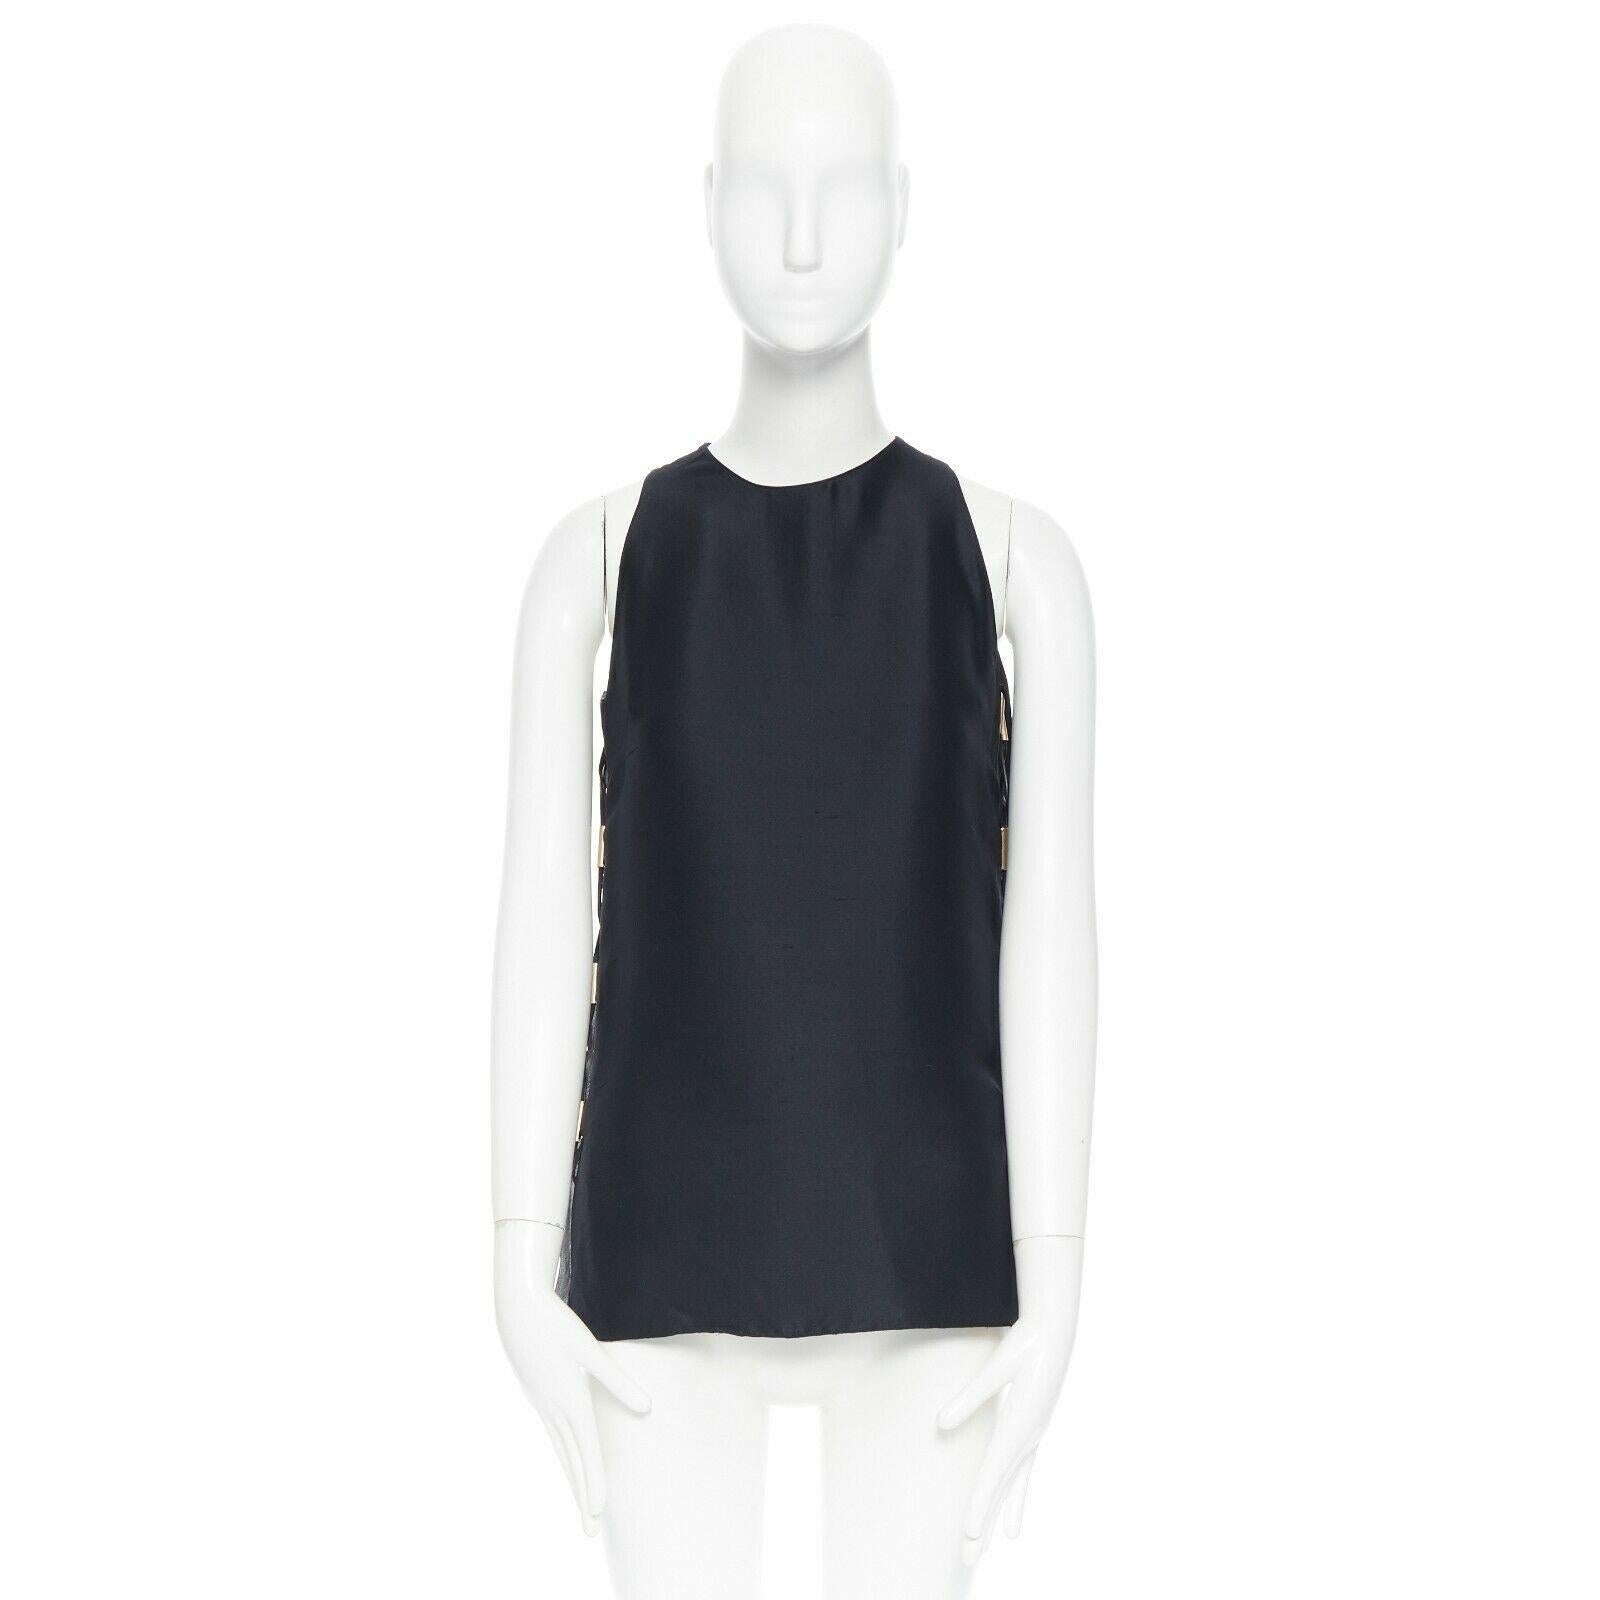 RALPH LAUREN black textured chiffon panel copper pipe leather lacing top US2 
Reference: LNKO/A01141 
Brand: Ralph Lauren 
Material: Cotton 
Color: Black 
Pattern: Solid 
Extra Detail: Textured sleeveless top. Chiffon panels at sides. Leather ropes